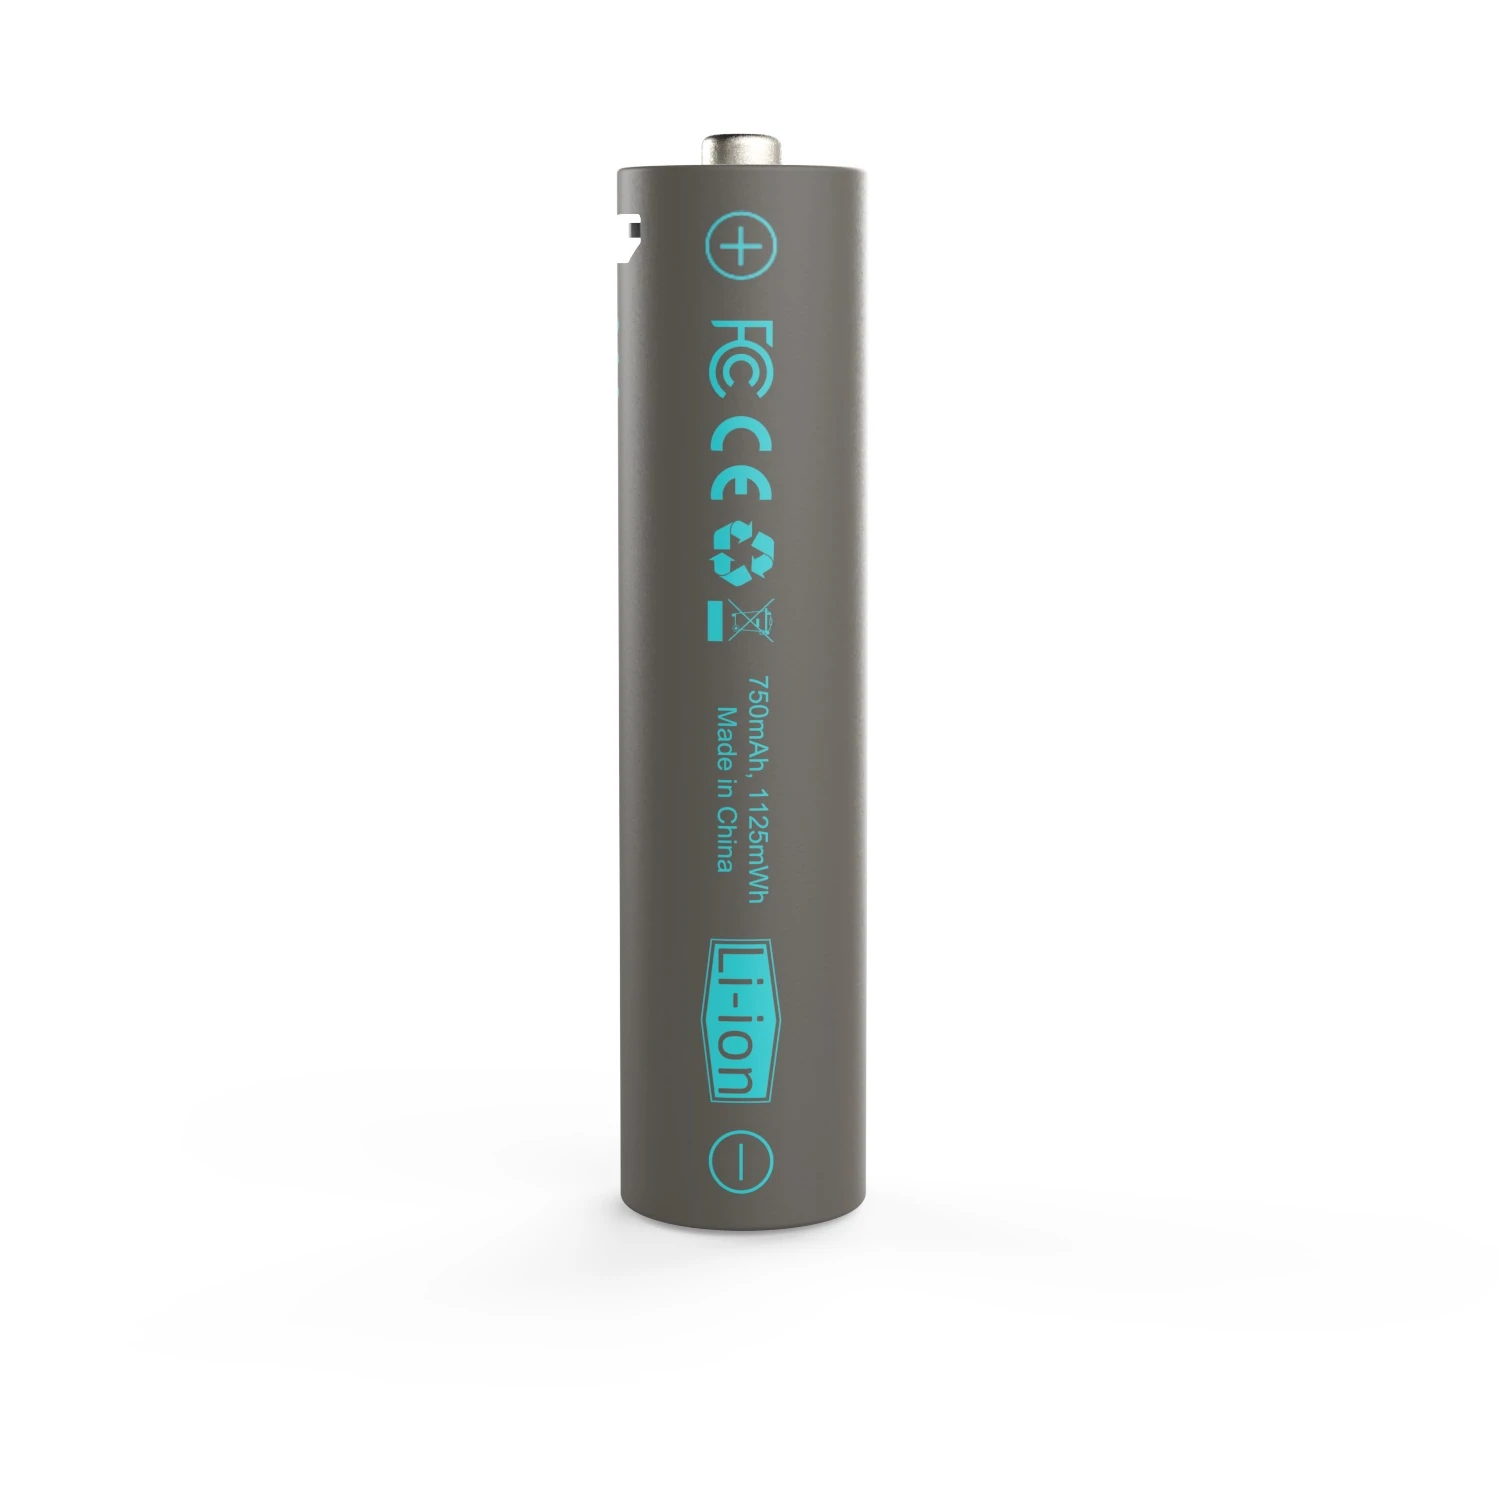 Piles rechargeables SAVE_IT en micro USB LR03 AAA - 450mAh (blister 2)